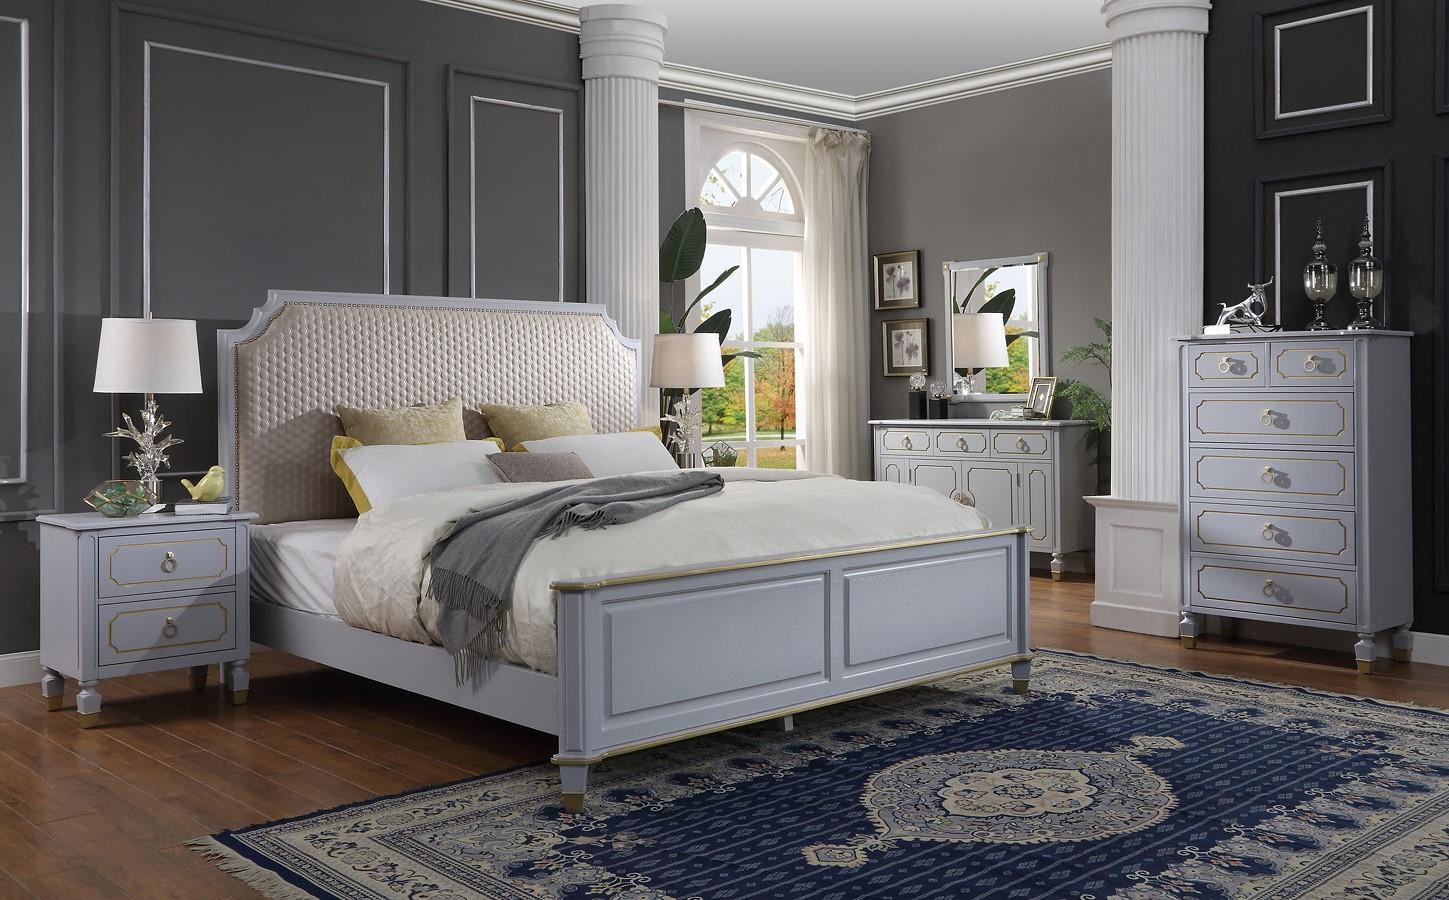 

    
Classic Beige & Gray California King 6pcs Bedroom Set by Acme House Marchese 28874CK-6pcs
